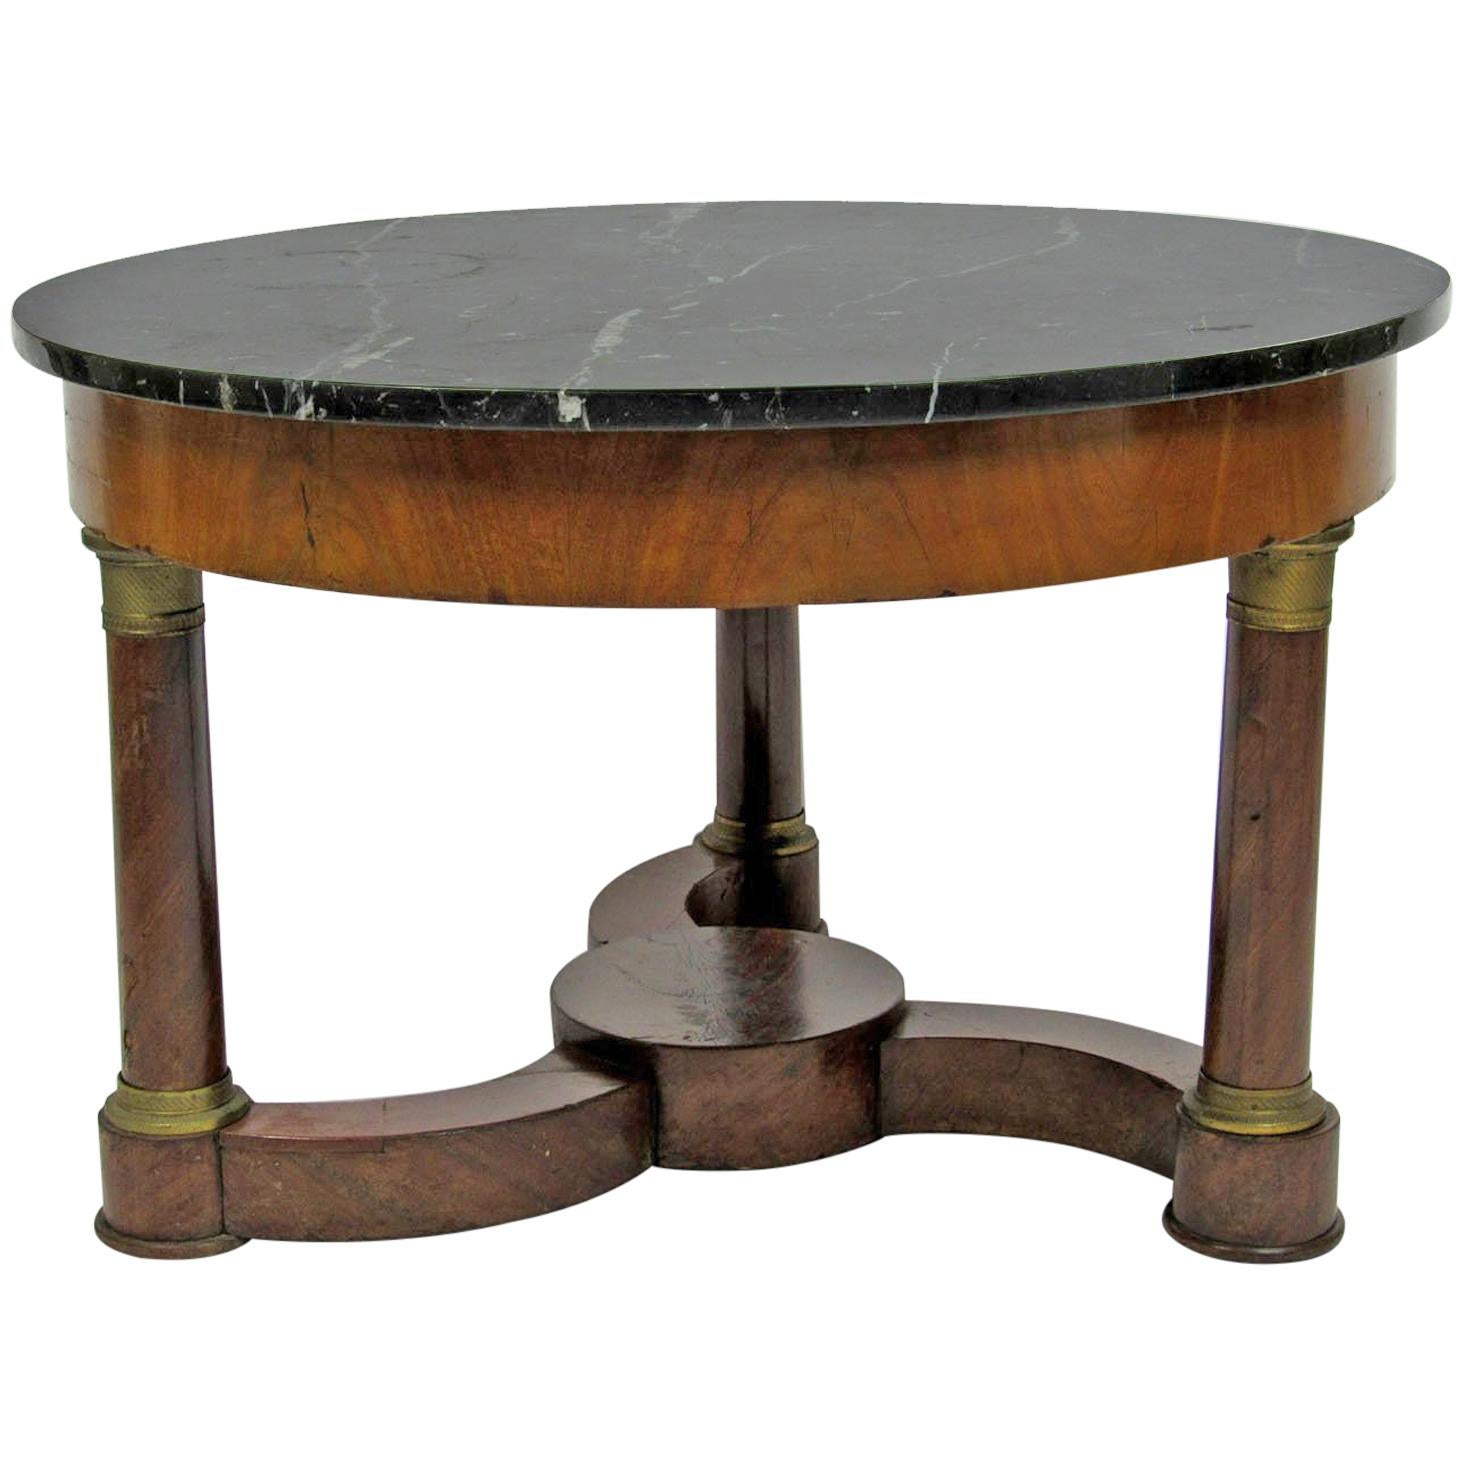 Early 19th Century French Empire Style Cocktail Table